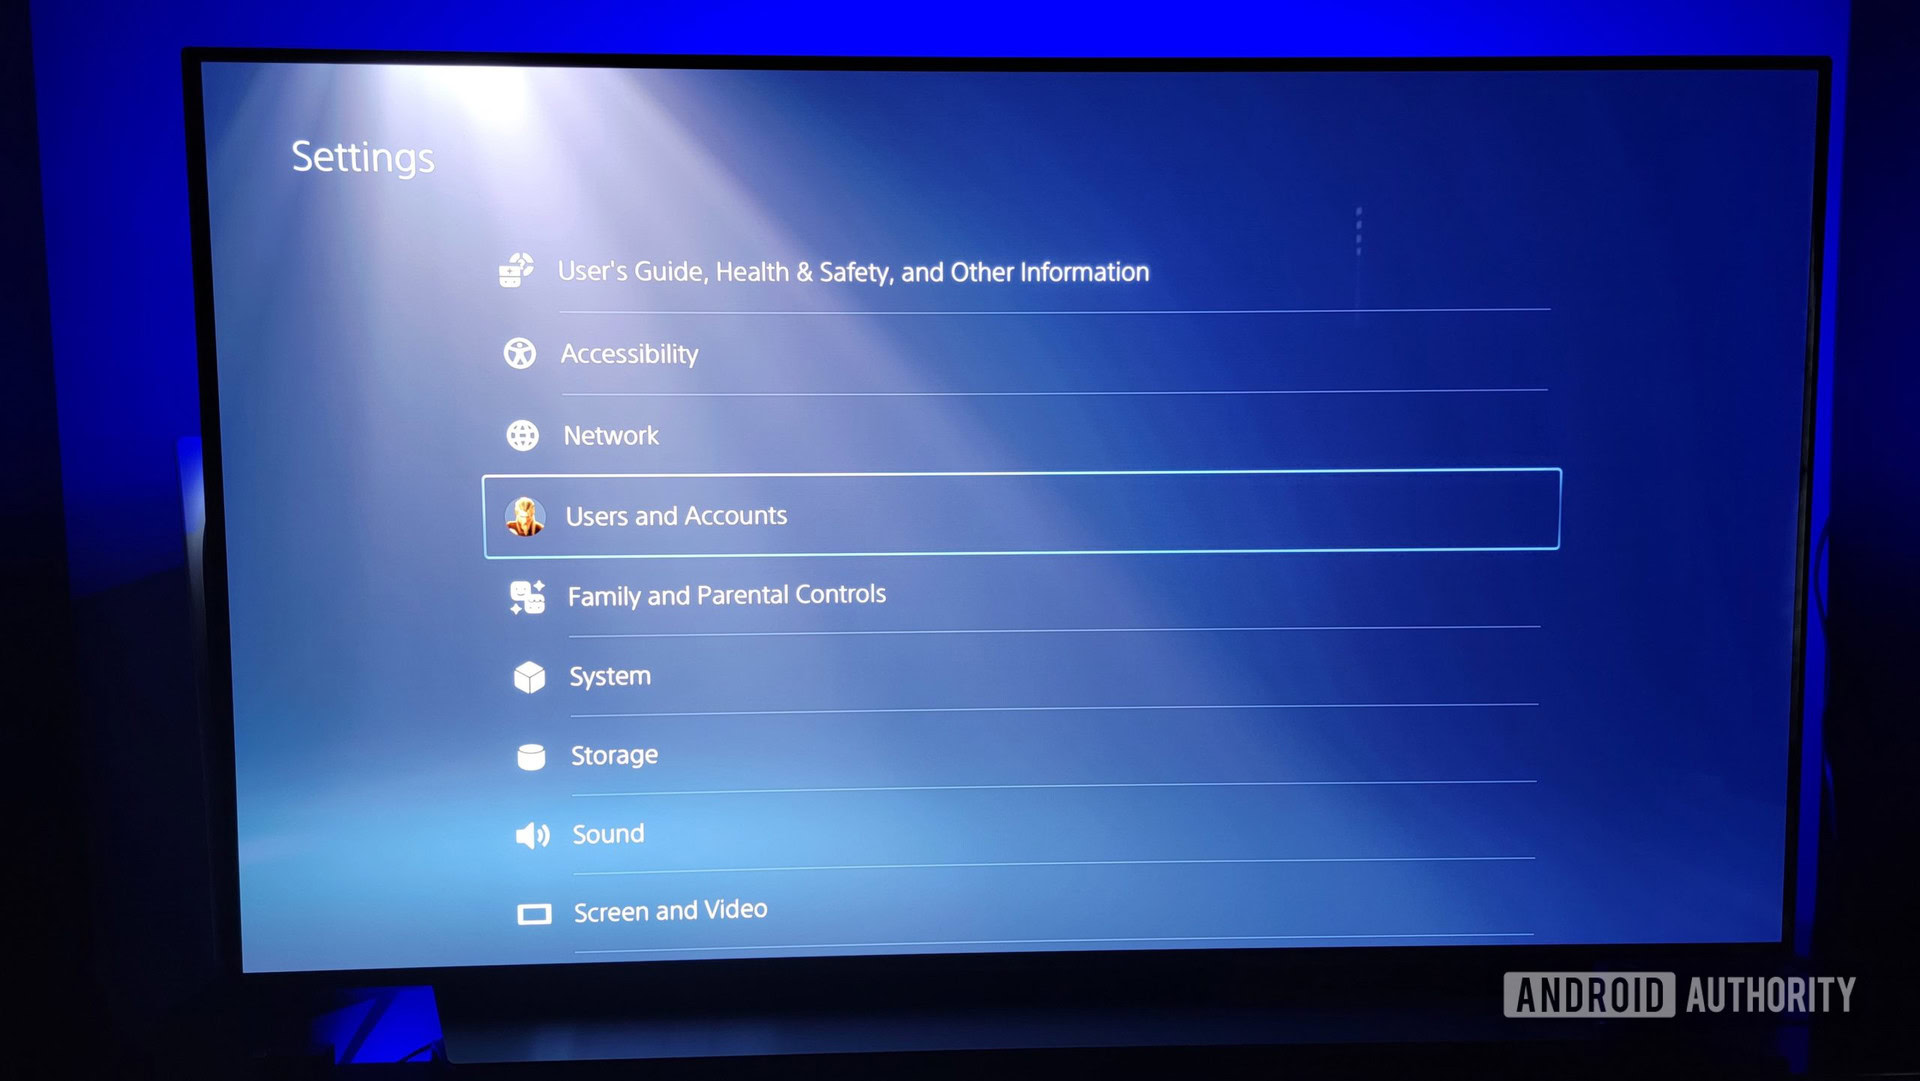 Instant Co-Op: How to Play PS5 Games With Friends Using Share Play